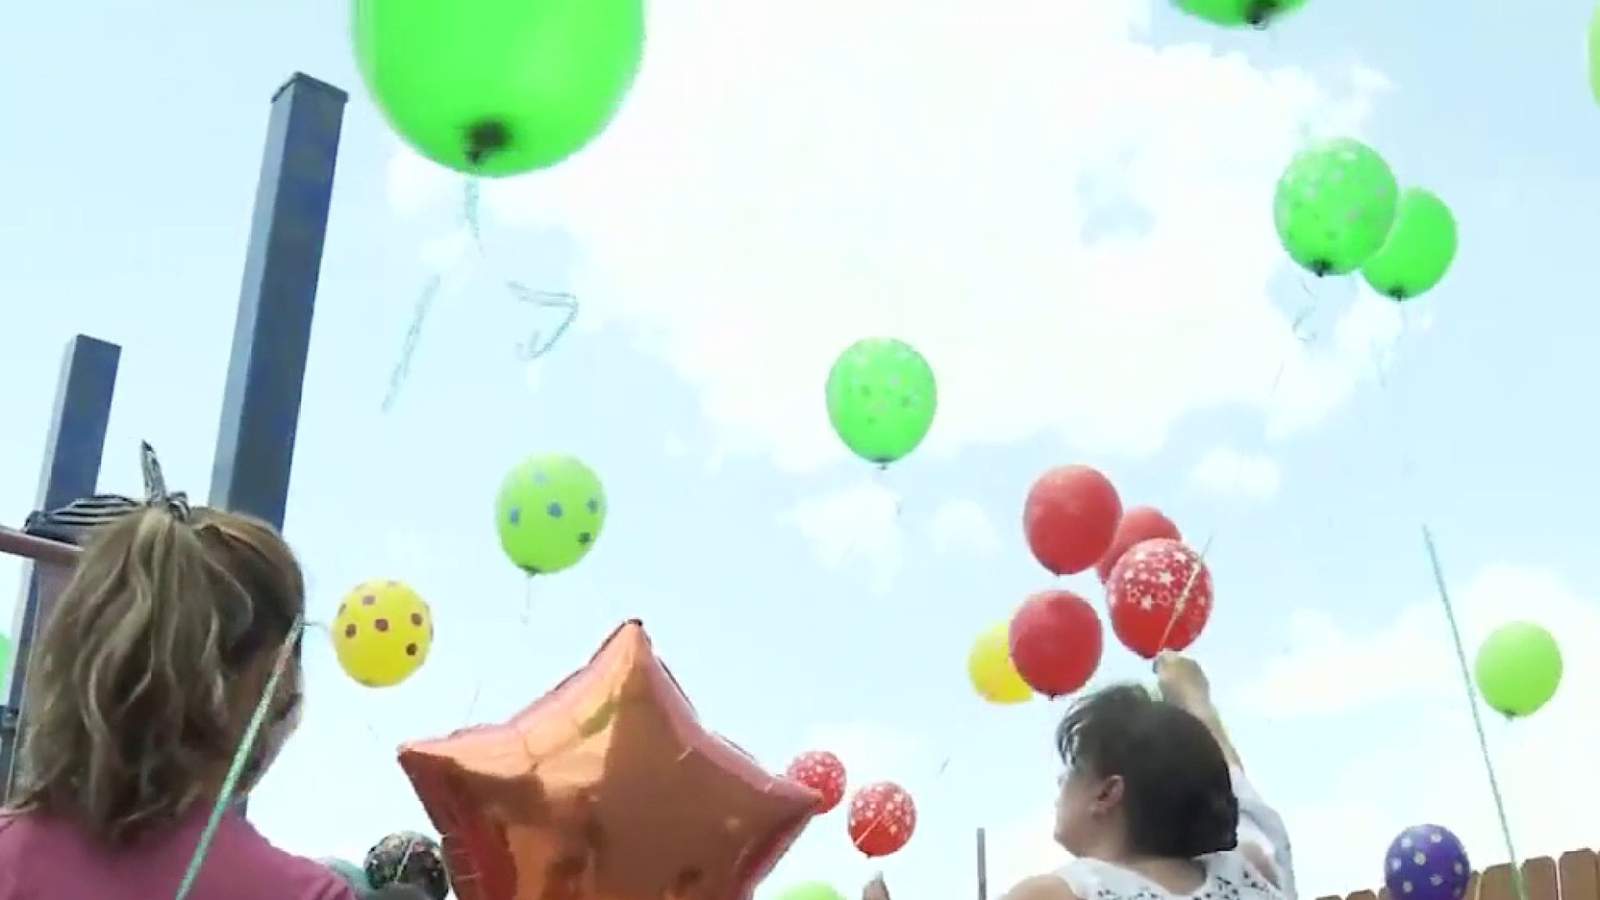 Balloons released in memory of toddler that died from injuries at San Antonio hospital